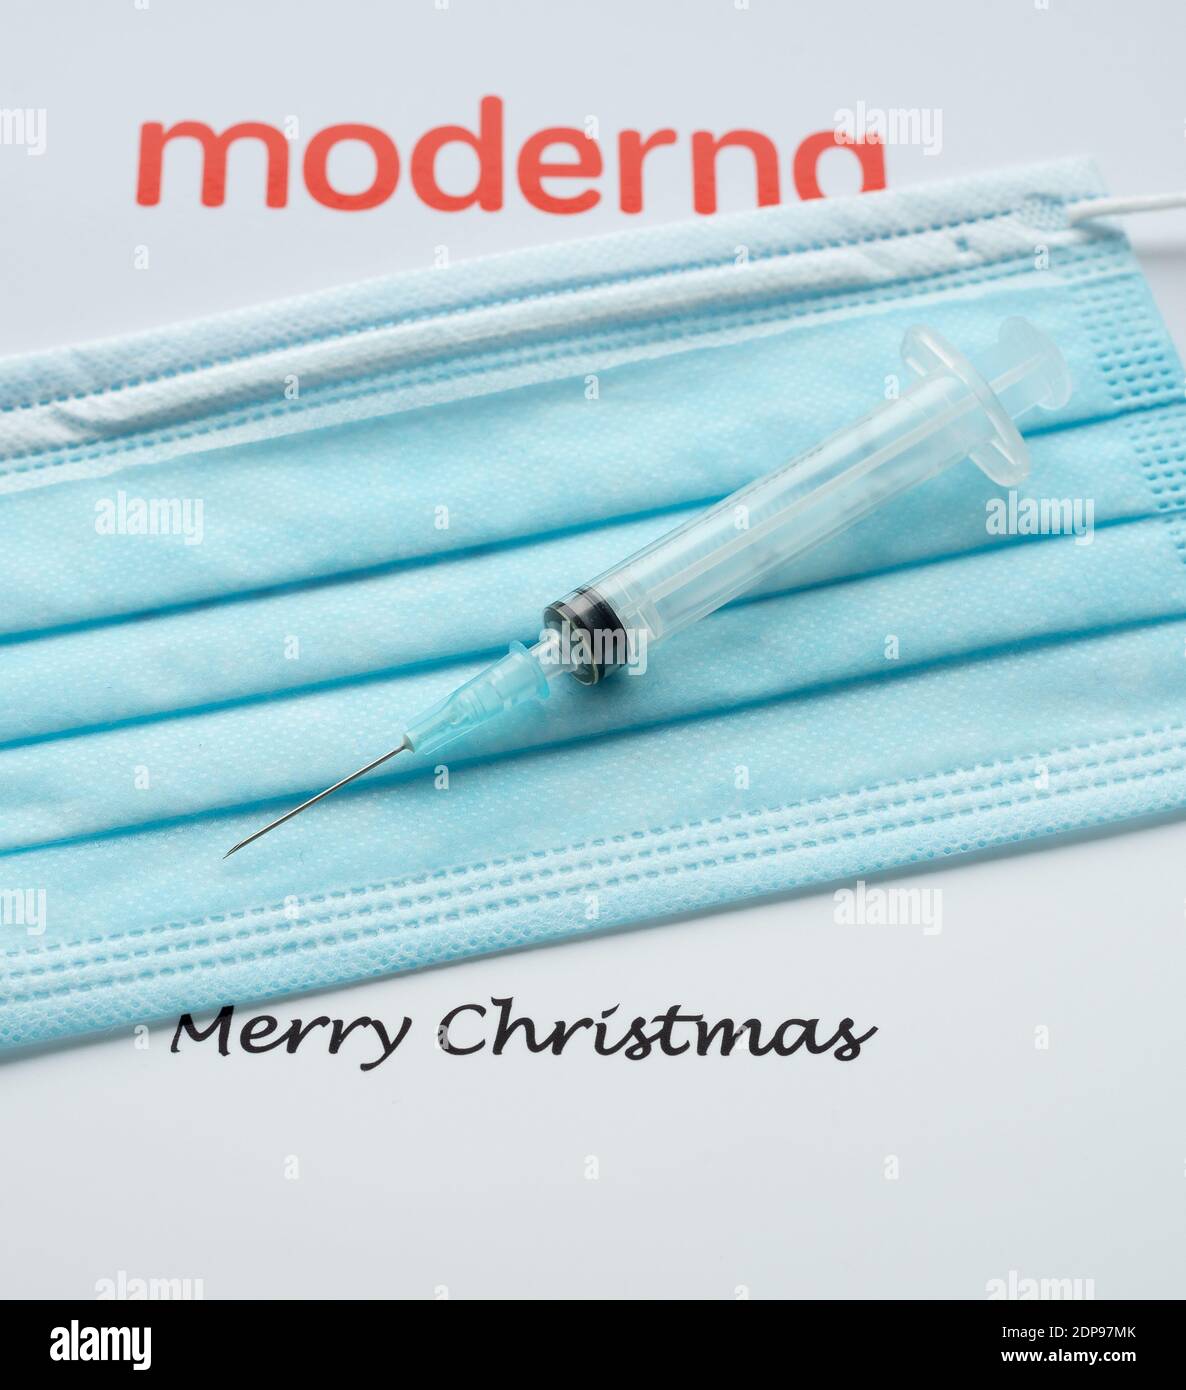 Moderna logo with a syringe and a face mask and the text merry christmas, Denmark, December 19, 2020 Stock Photo